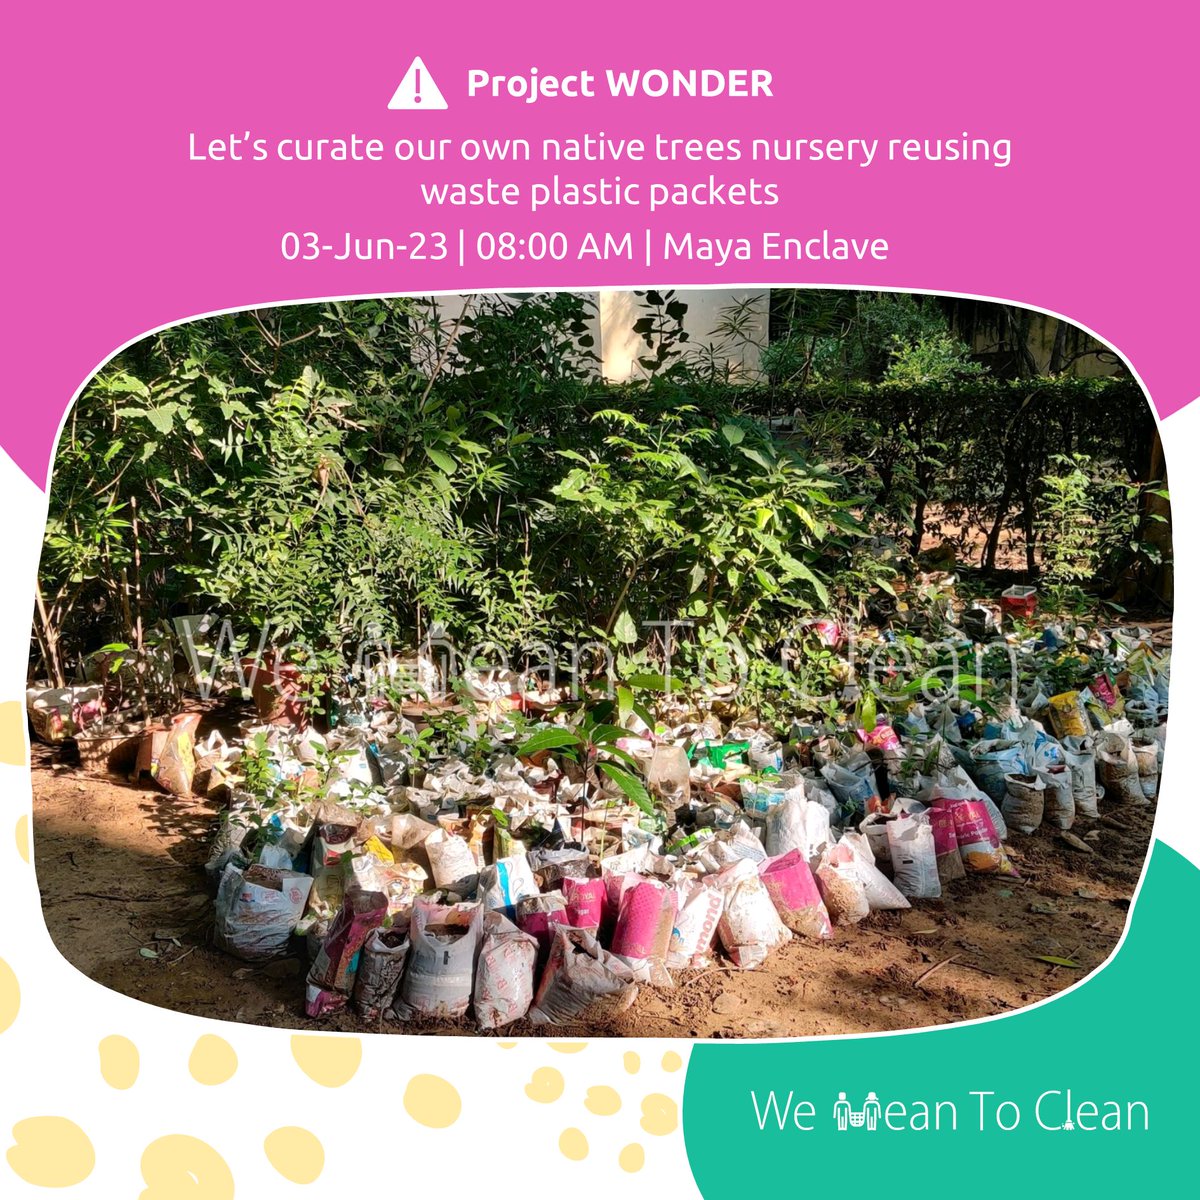 #ProjectWONDER
We're reusing waste plastic packets to create a native trees nursery
Join us!

#WeMeanToClean #CleanDelhi #SwachhBharat #MyCleanIndia #AirPollution #DelhiPollution #DelhiAirPollution #DelhiAirEmergency #DelhiAirQuality #Reuse #WasteManagement #ClimateAction